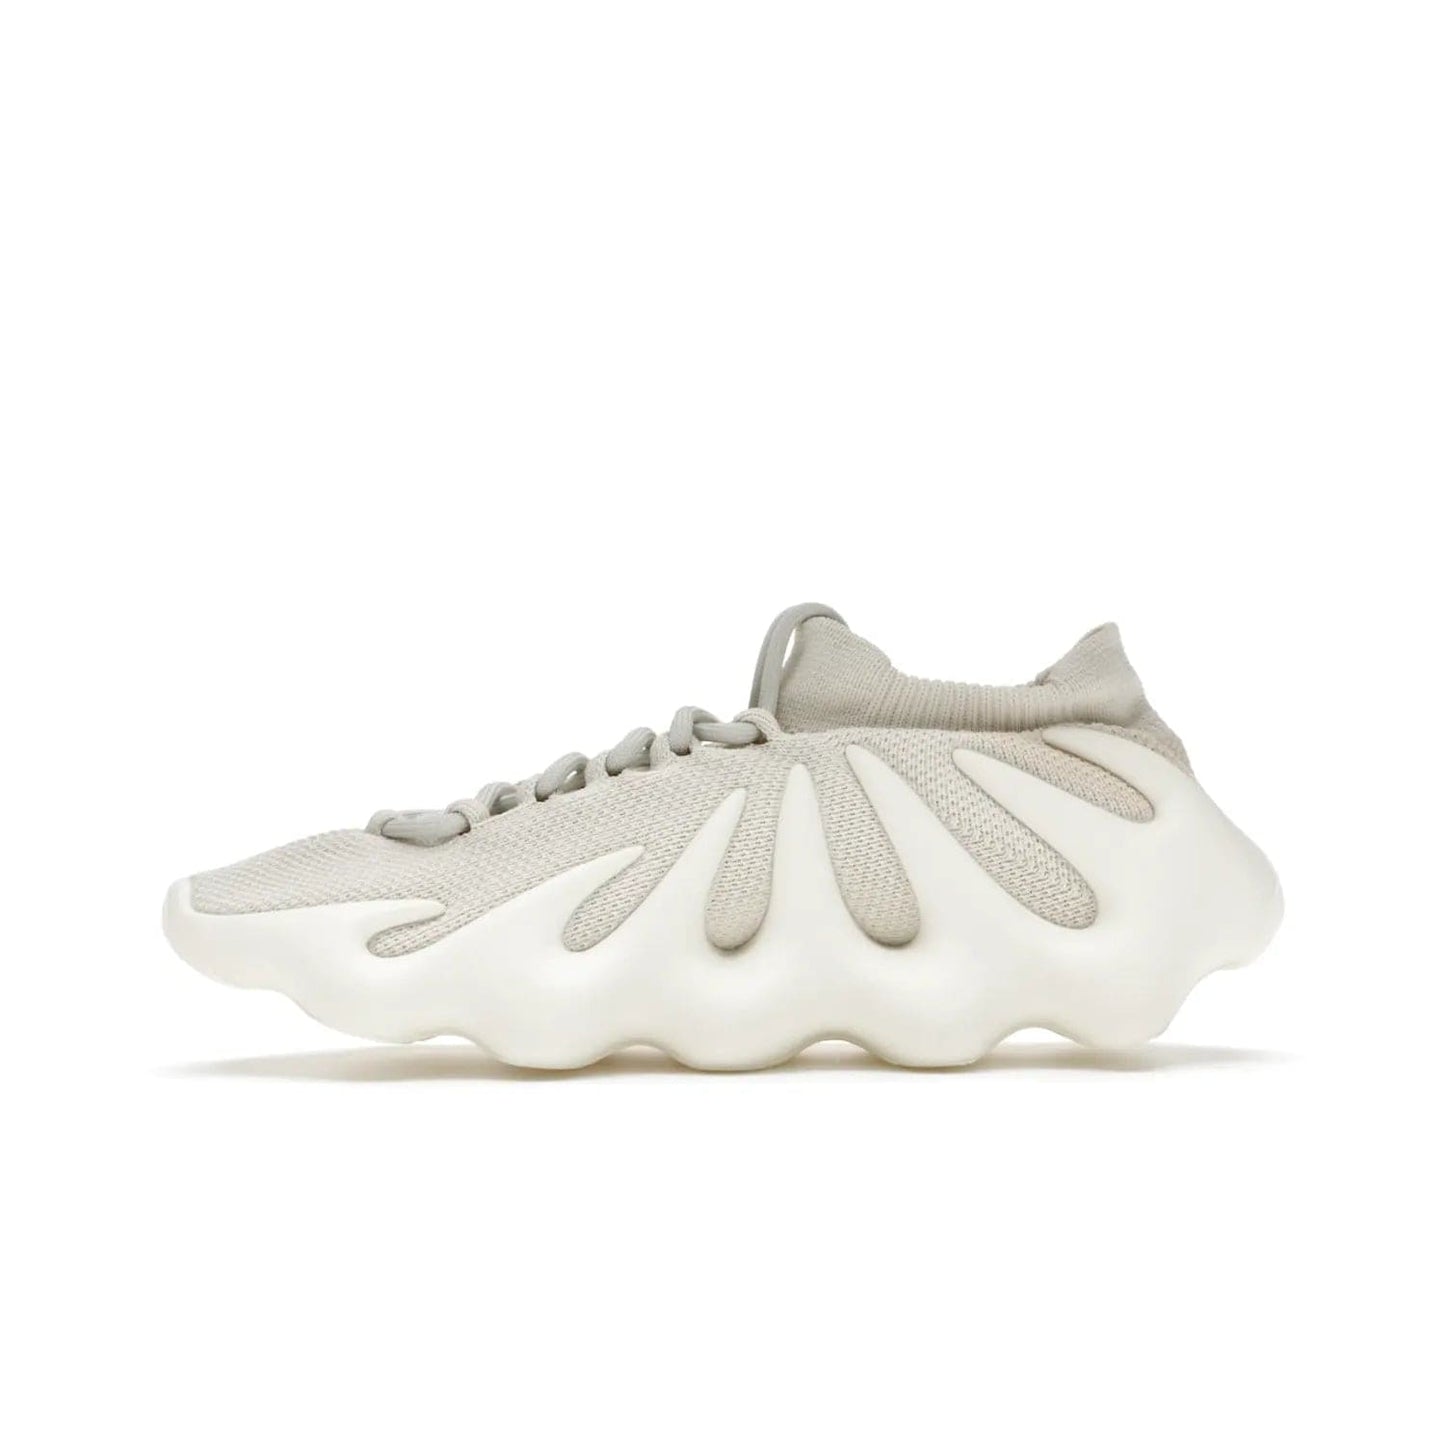 adidas Yeezy 450 Cloud White - Image 19 - Only at www.BallersClubKickz.com - Experience the future with the adidas Yeezy 450 Cloud White. A two-piece design featuring an extreme foam sole and mesh upper, this silhouette is expected to release in March 2021. Get your hands on this striking Cloud White/Cloud White colorway and stand out in the crowd.